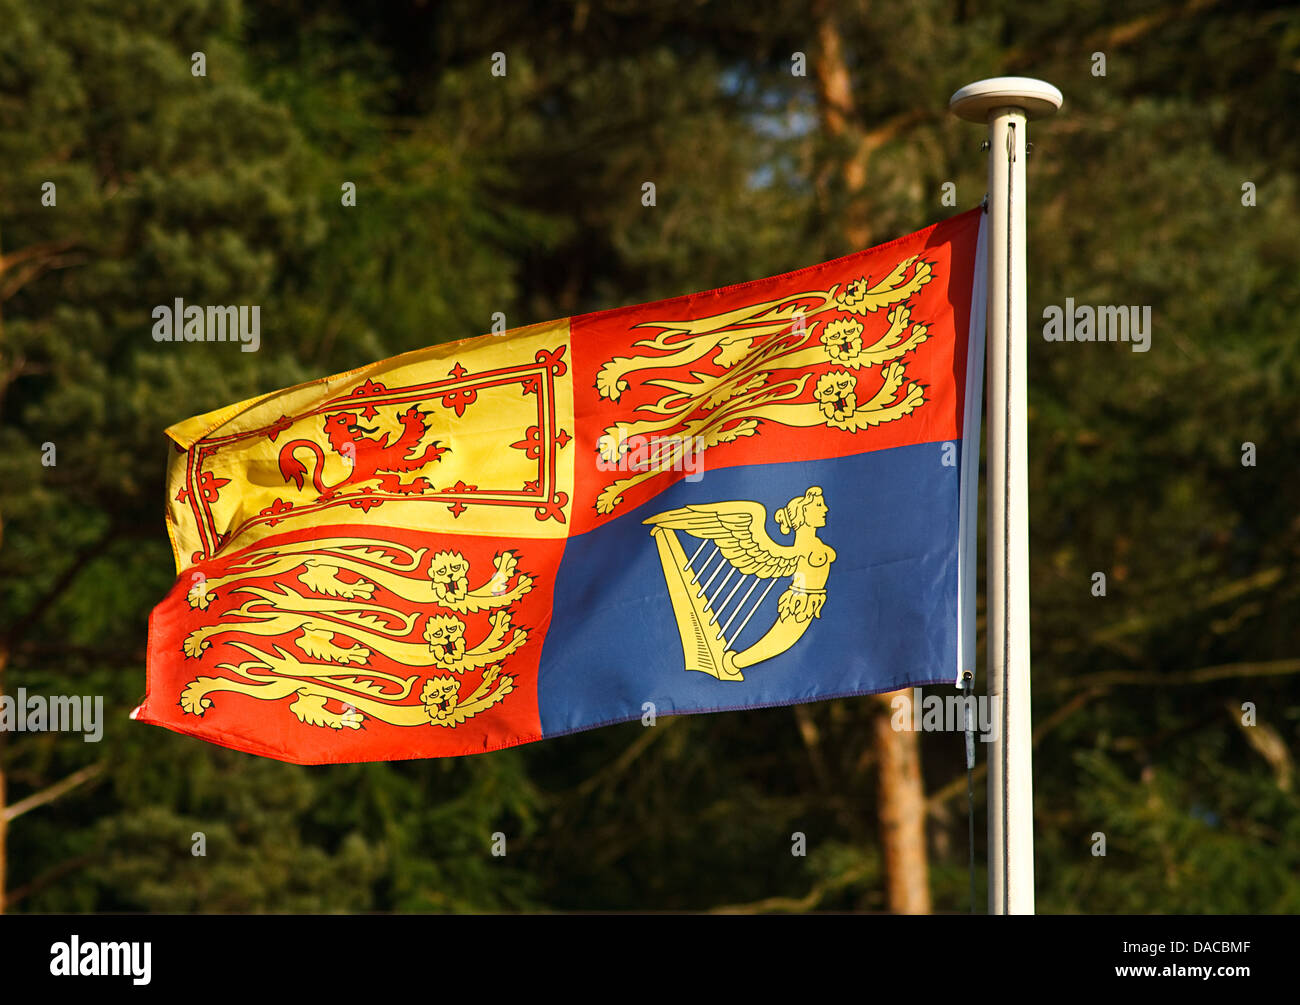 the royal standard flag waving and rippling in the wind Stock Photo